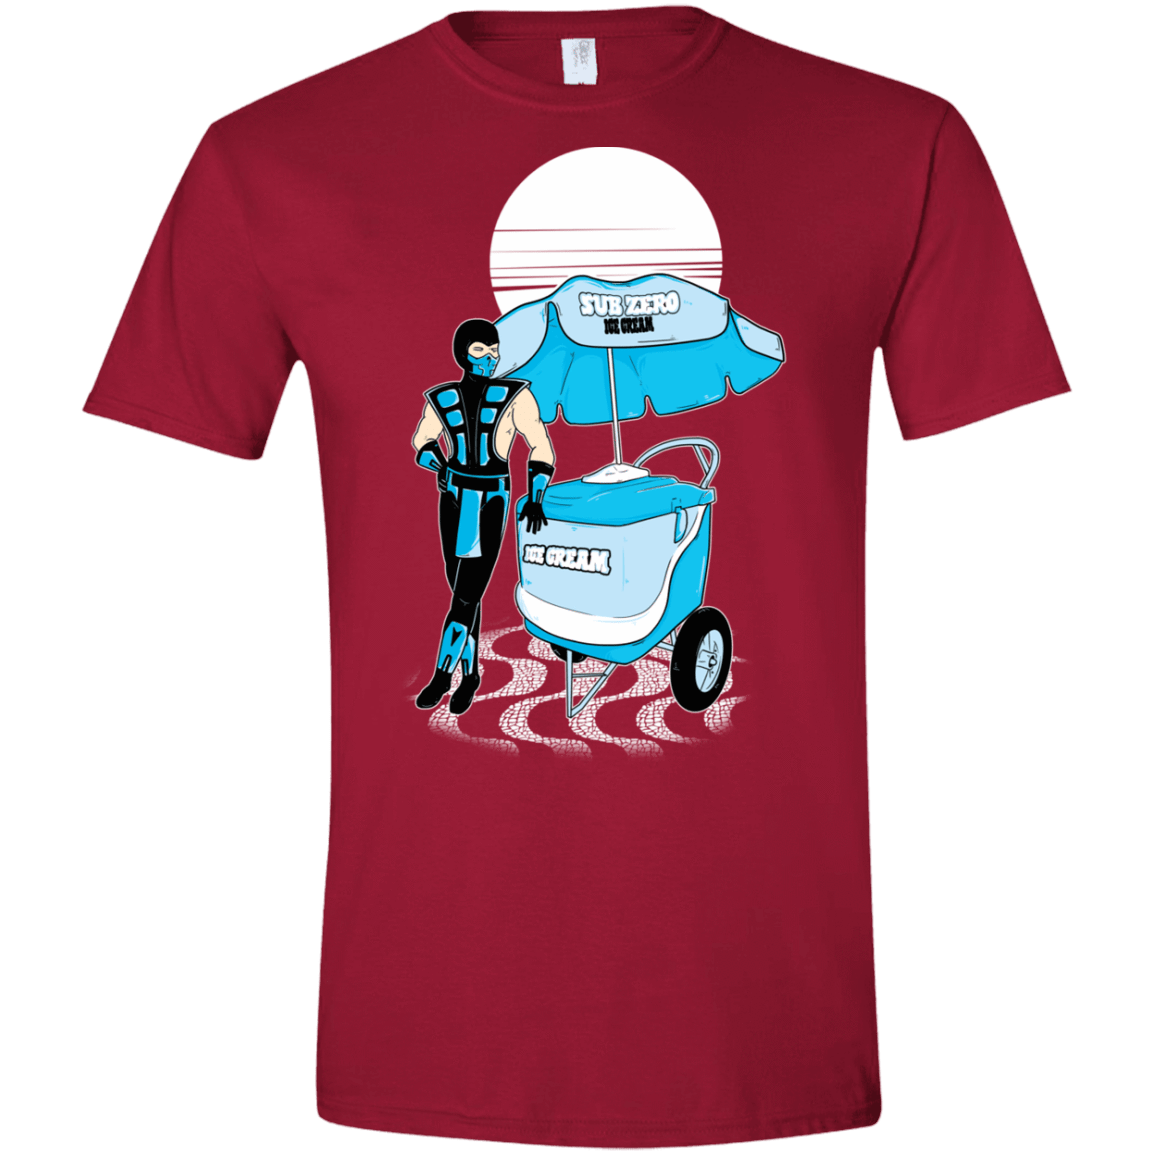 T-Shirts Cardinal Red / S Sub Zero Ice Cream Men's Semi-Fitted Softstyle